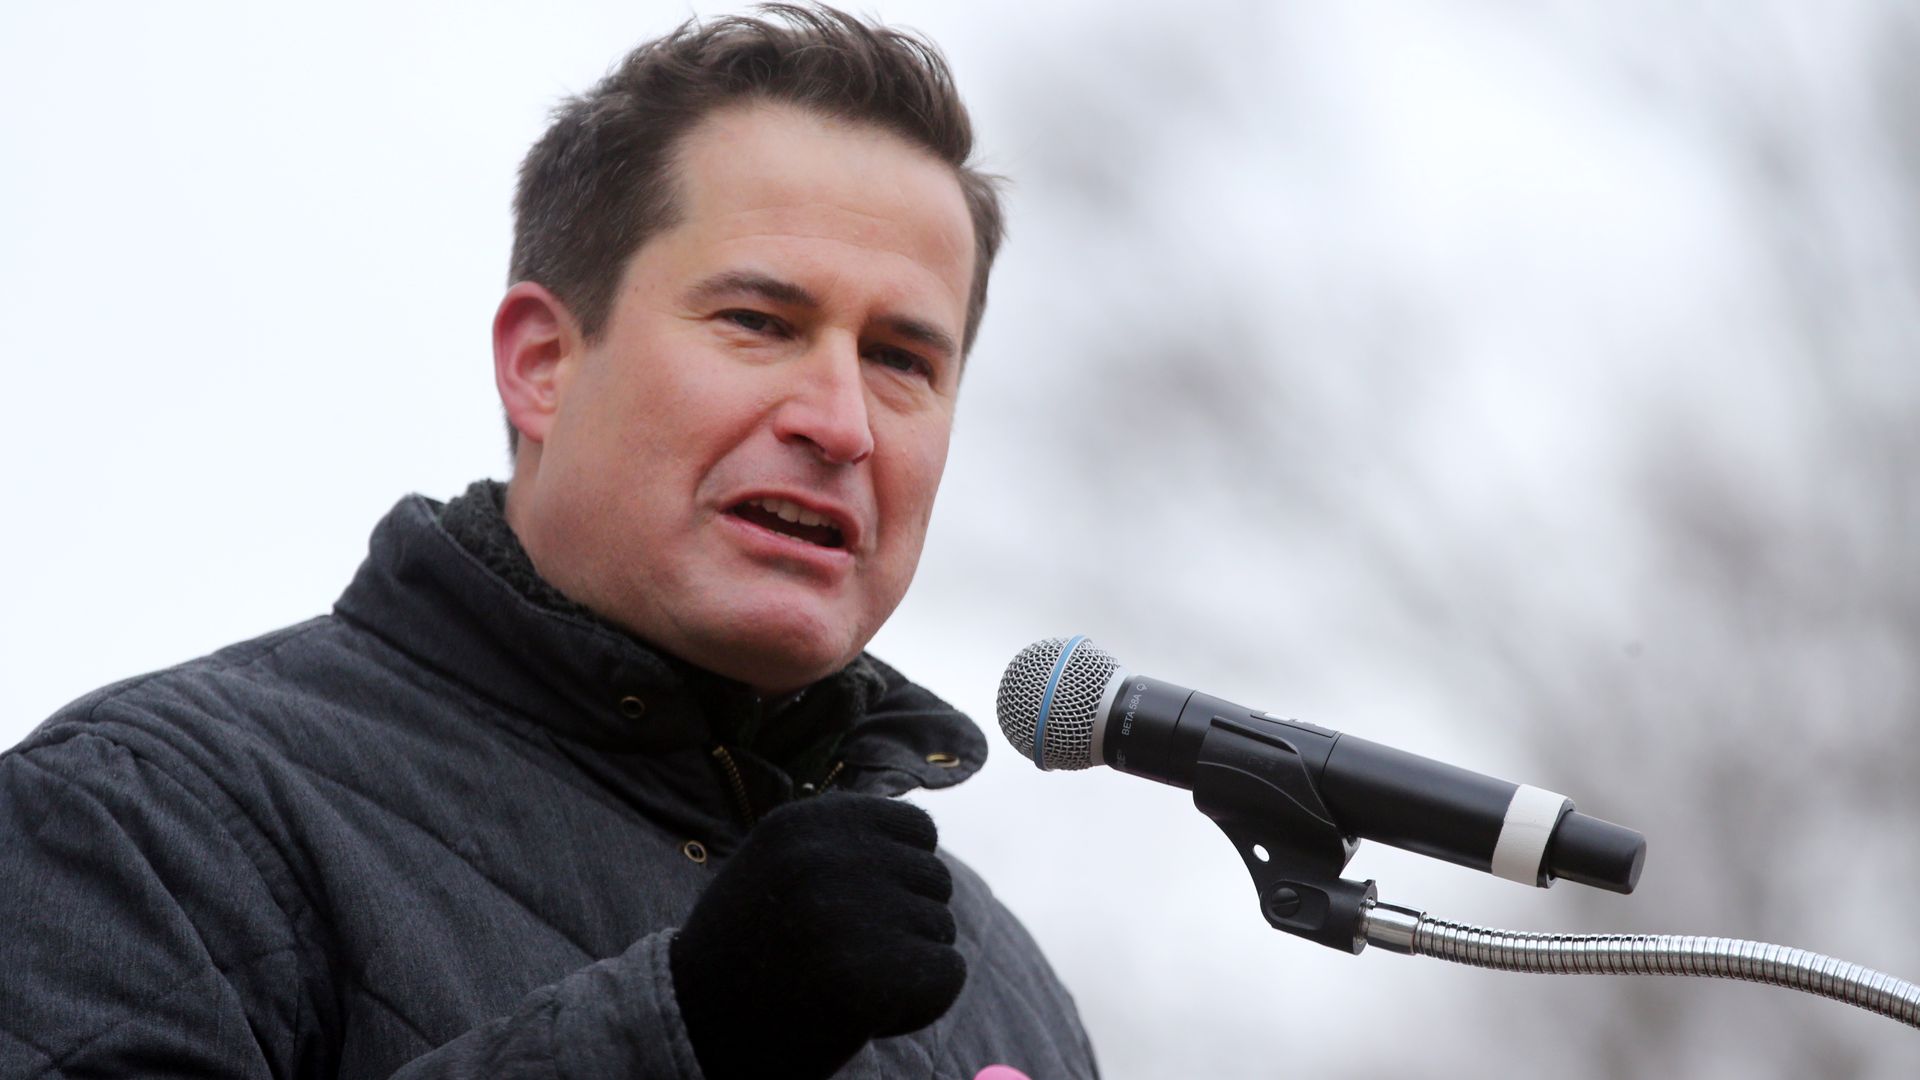  Congressman Seth Moulton addresses the crowd during a Stand With Planned Parenthood rally at the Boston Common in Boston, Mass. on March 4, 2017. 